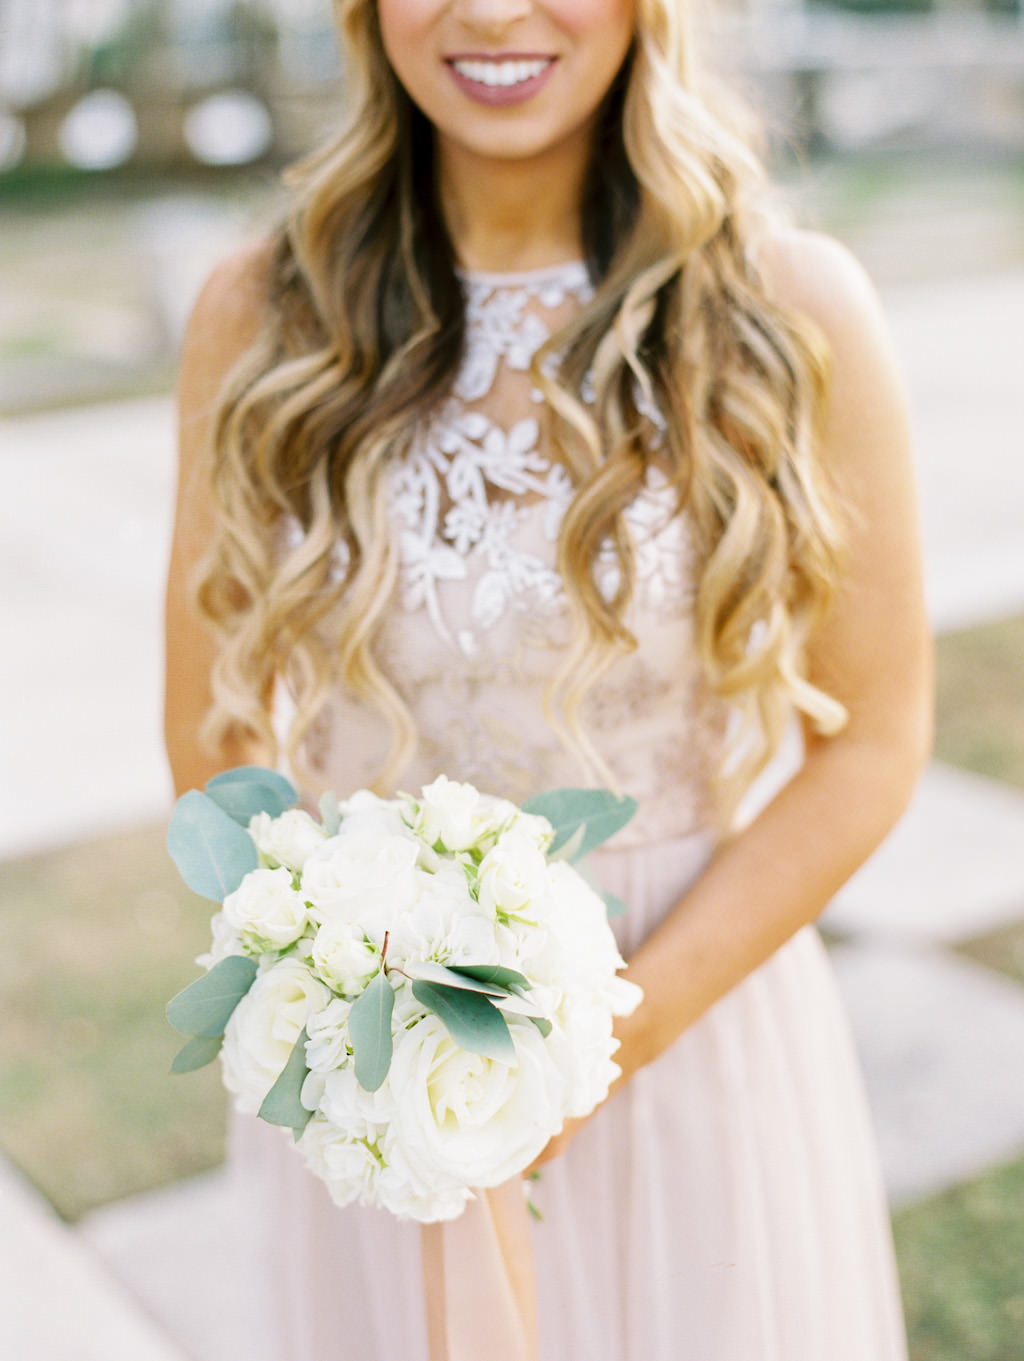 Outdoor Bridesmaid Wedding Portrait in Champagne Floral Lace Illusion Halter Blush Amsale Dress, with White Floral and Greenery Bouquet | Tampa Dress Shop Bella Bridesmaids